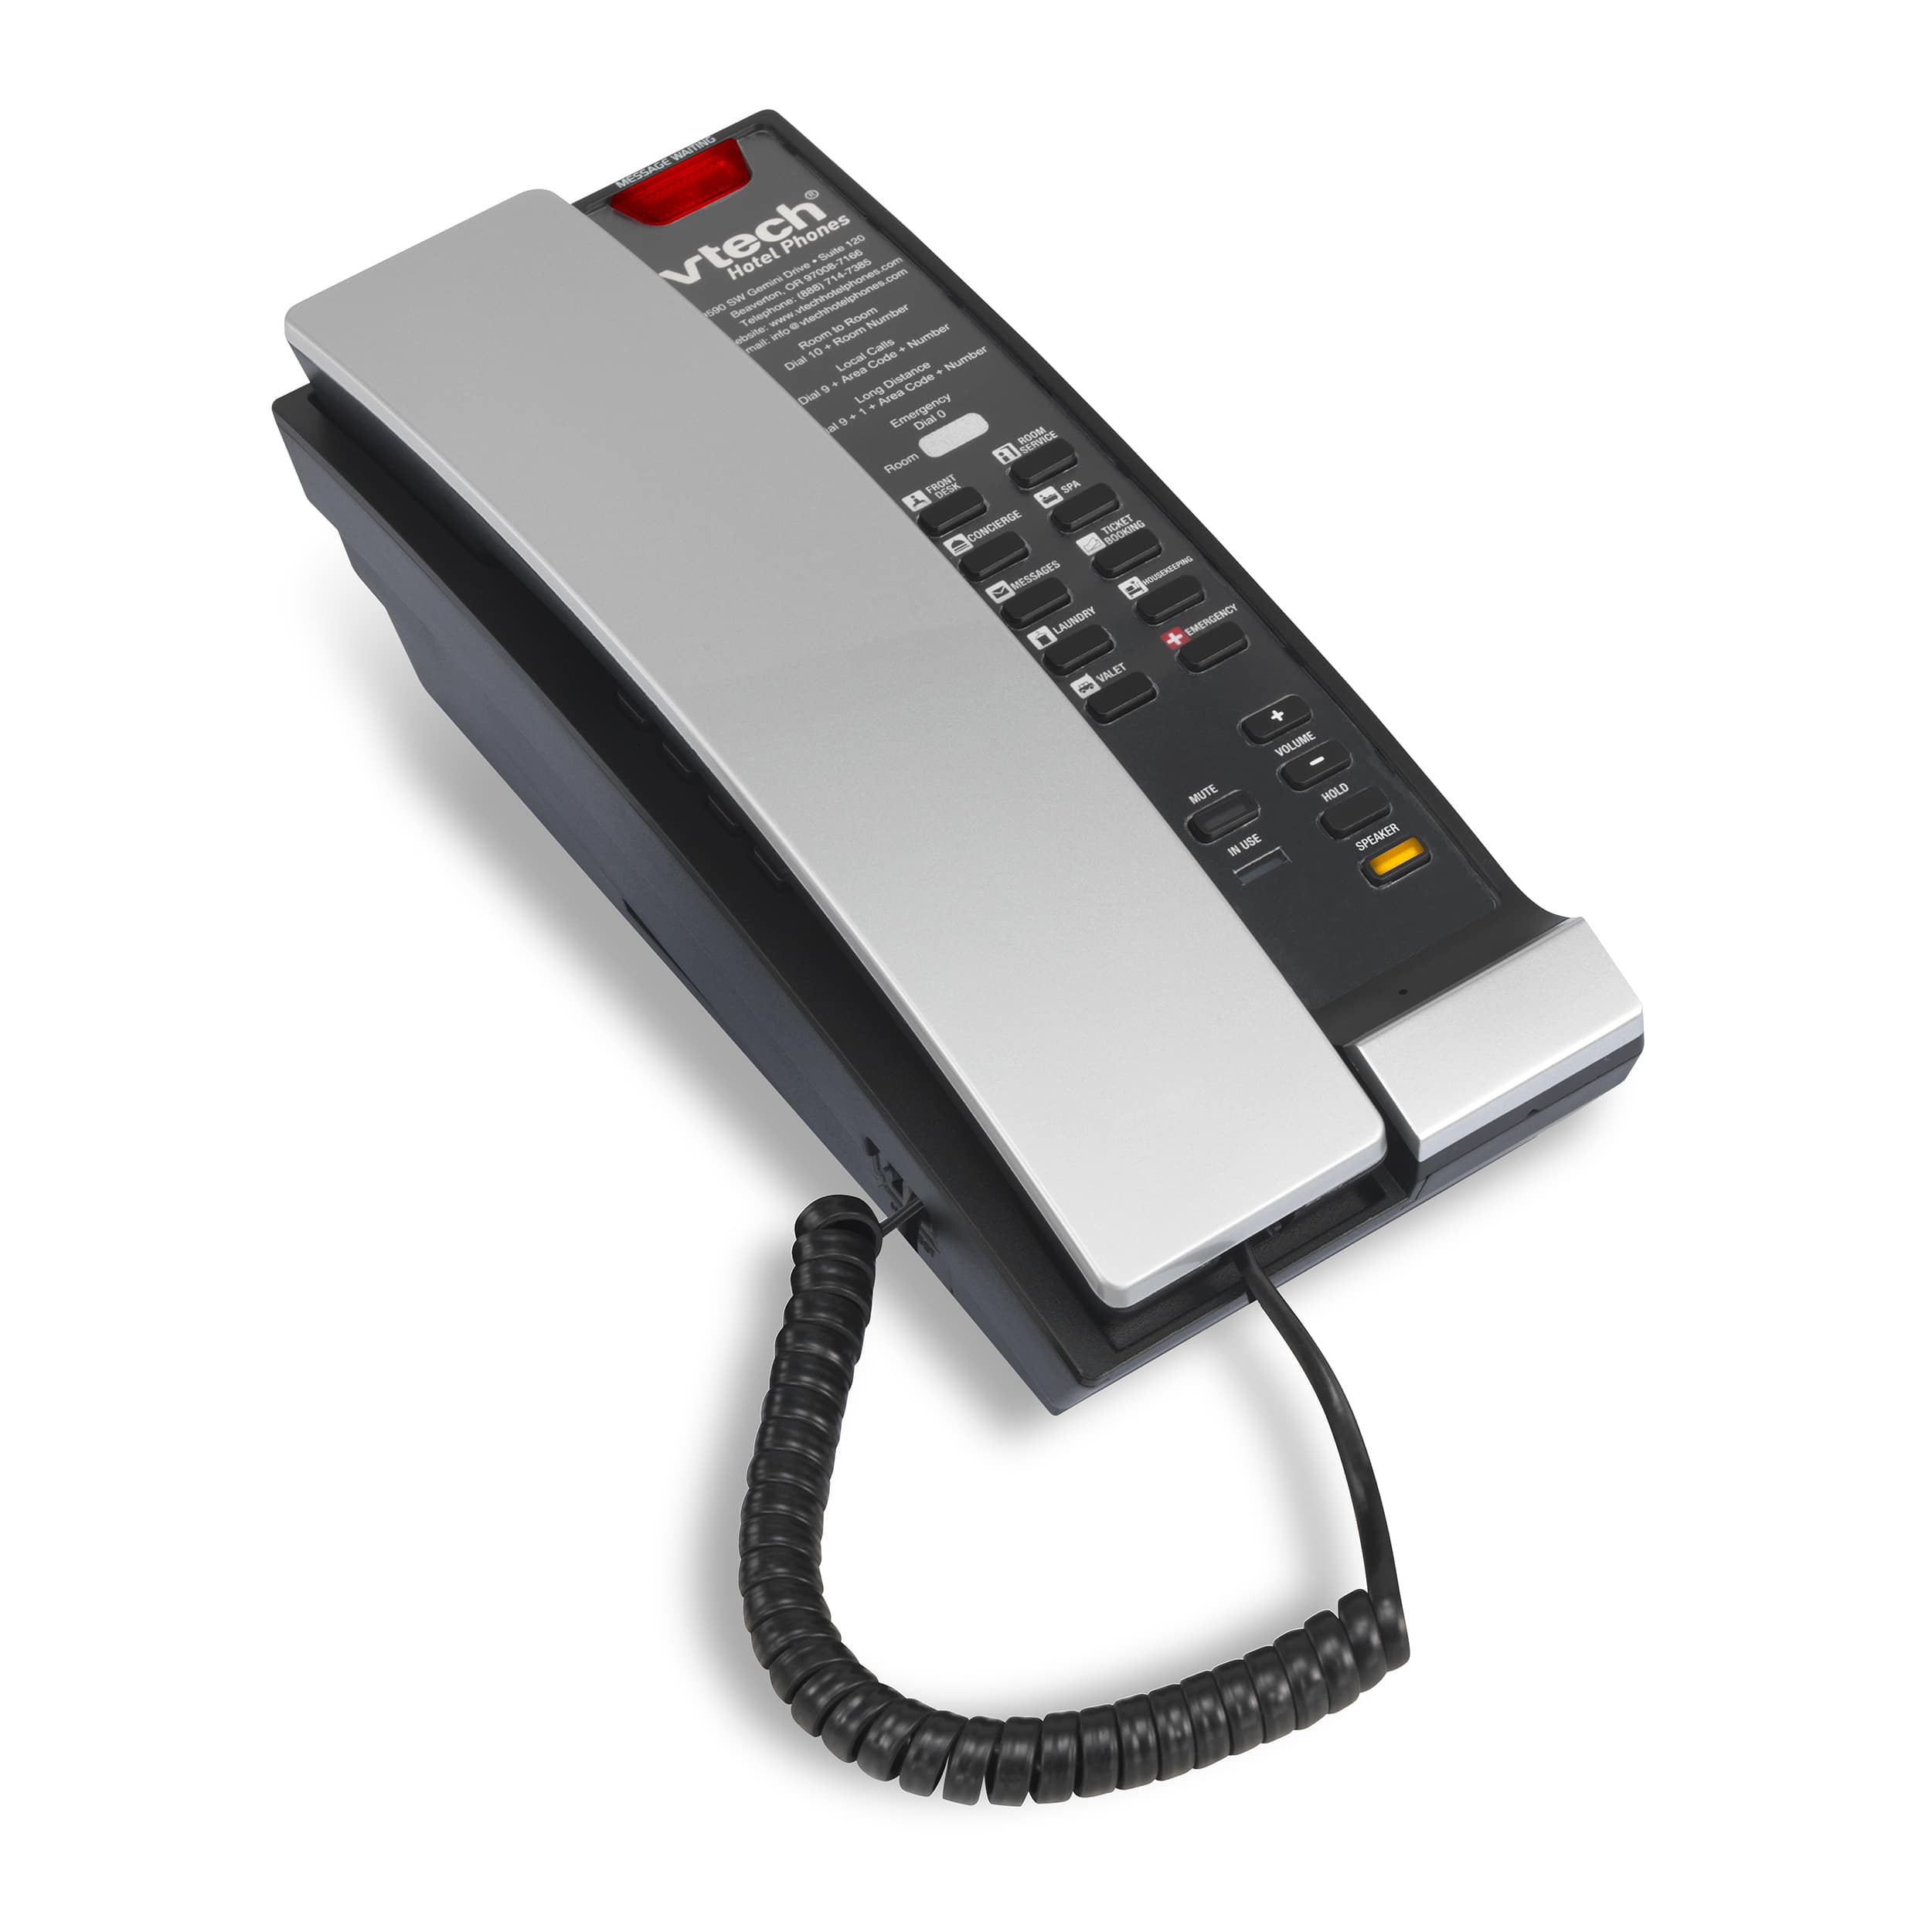 Image of 1-Line Contemporary Analog Corded Petite Phone with Speakerphone | A2211-SPK Silver & Black